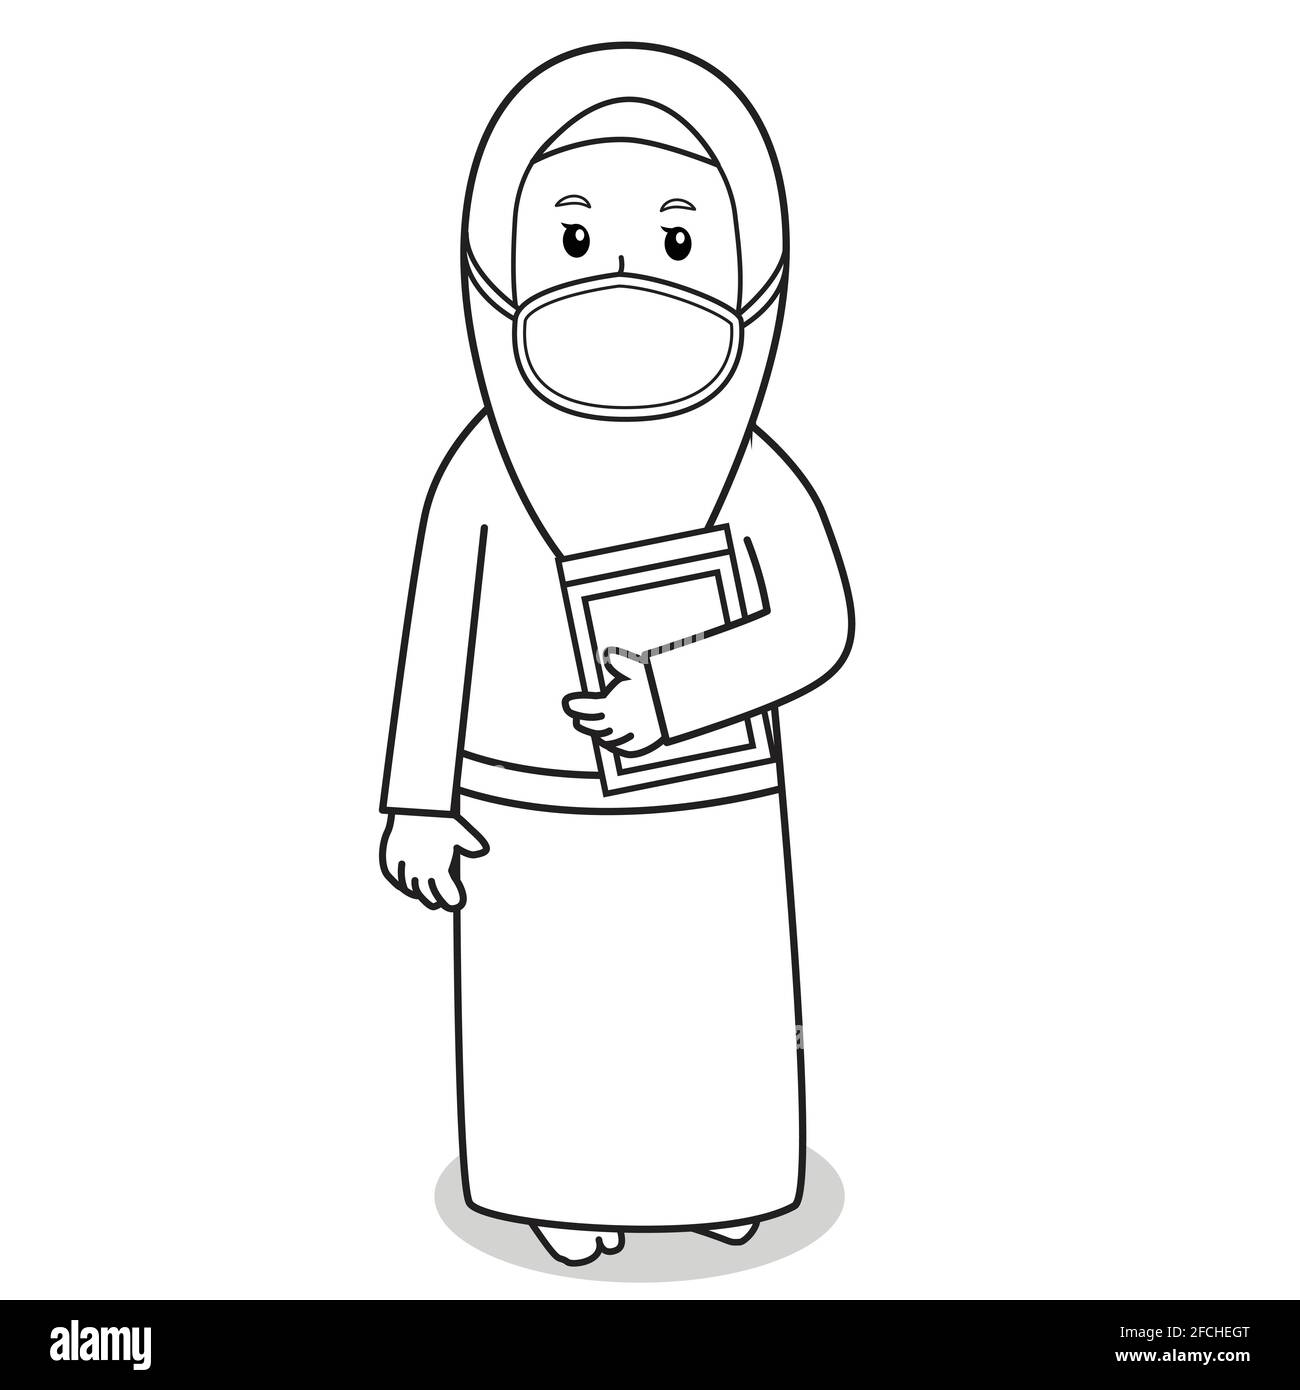 Muslim Woman use green dress traditional muslim. bring al quran holy book in ramadan month, using mask and healthy protocol.Character illustration. Stock Vector